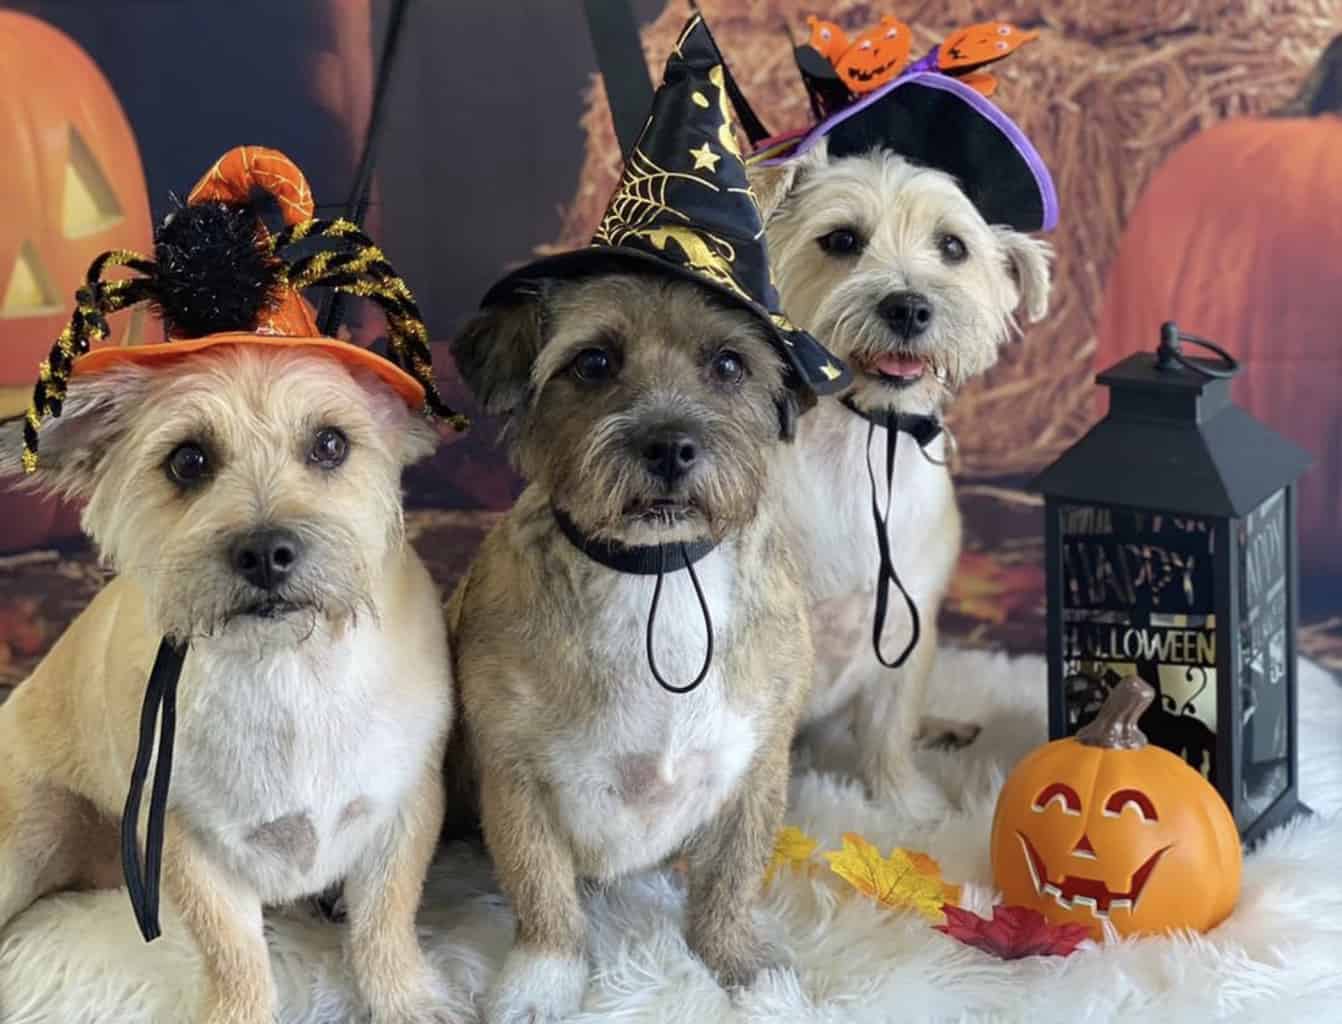 Local dog groomer dresses up dogs in Halloween costumes